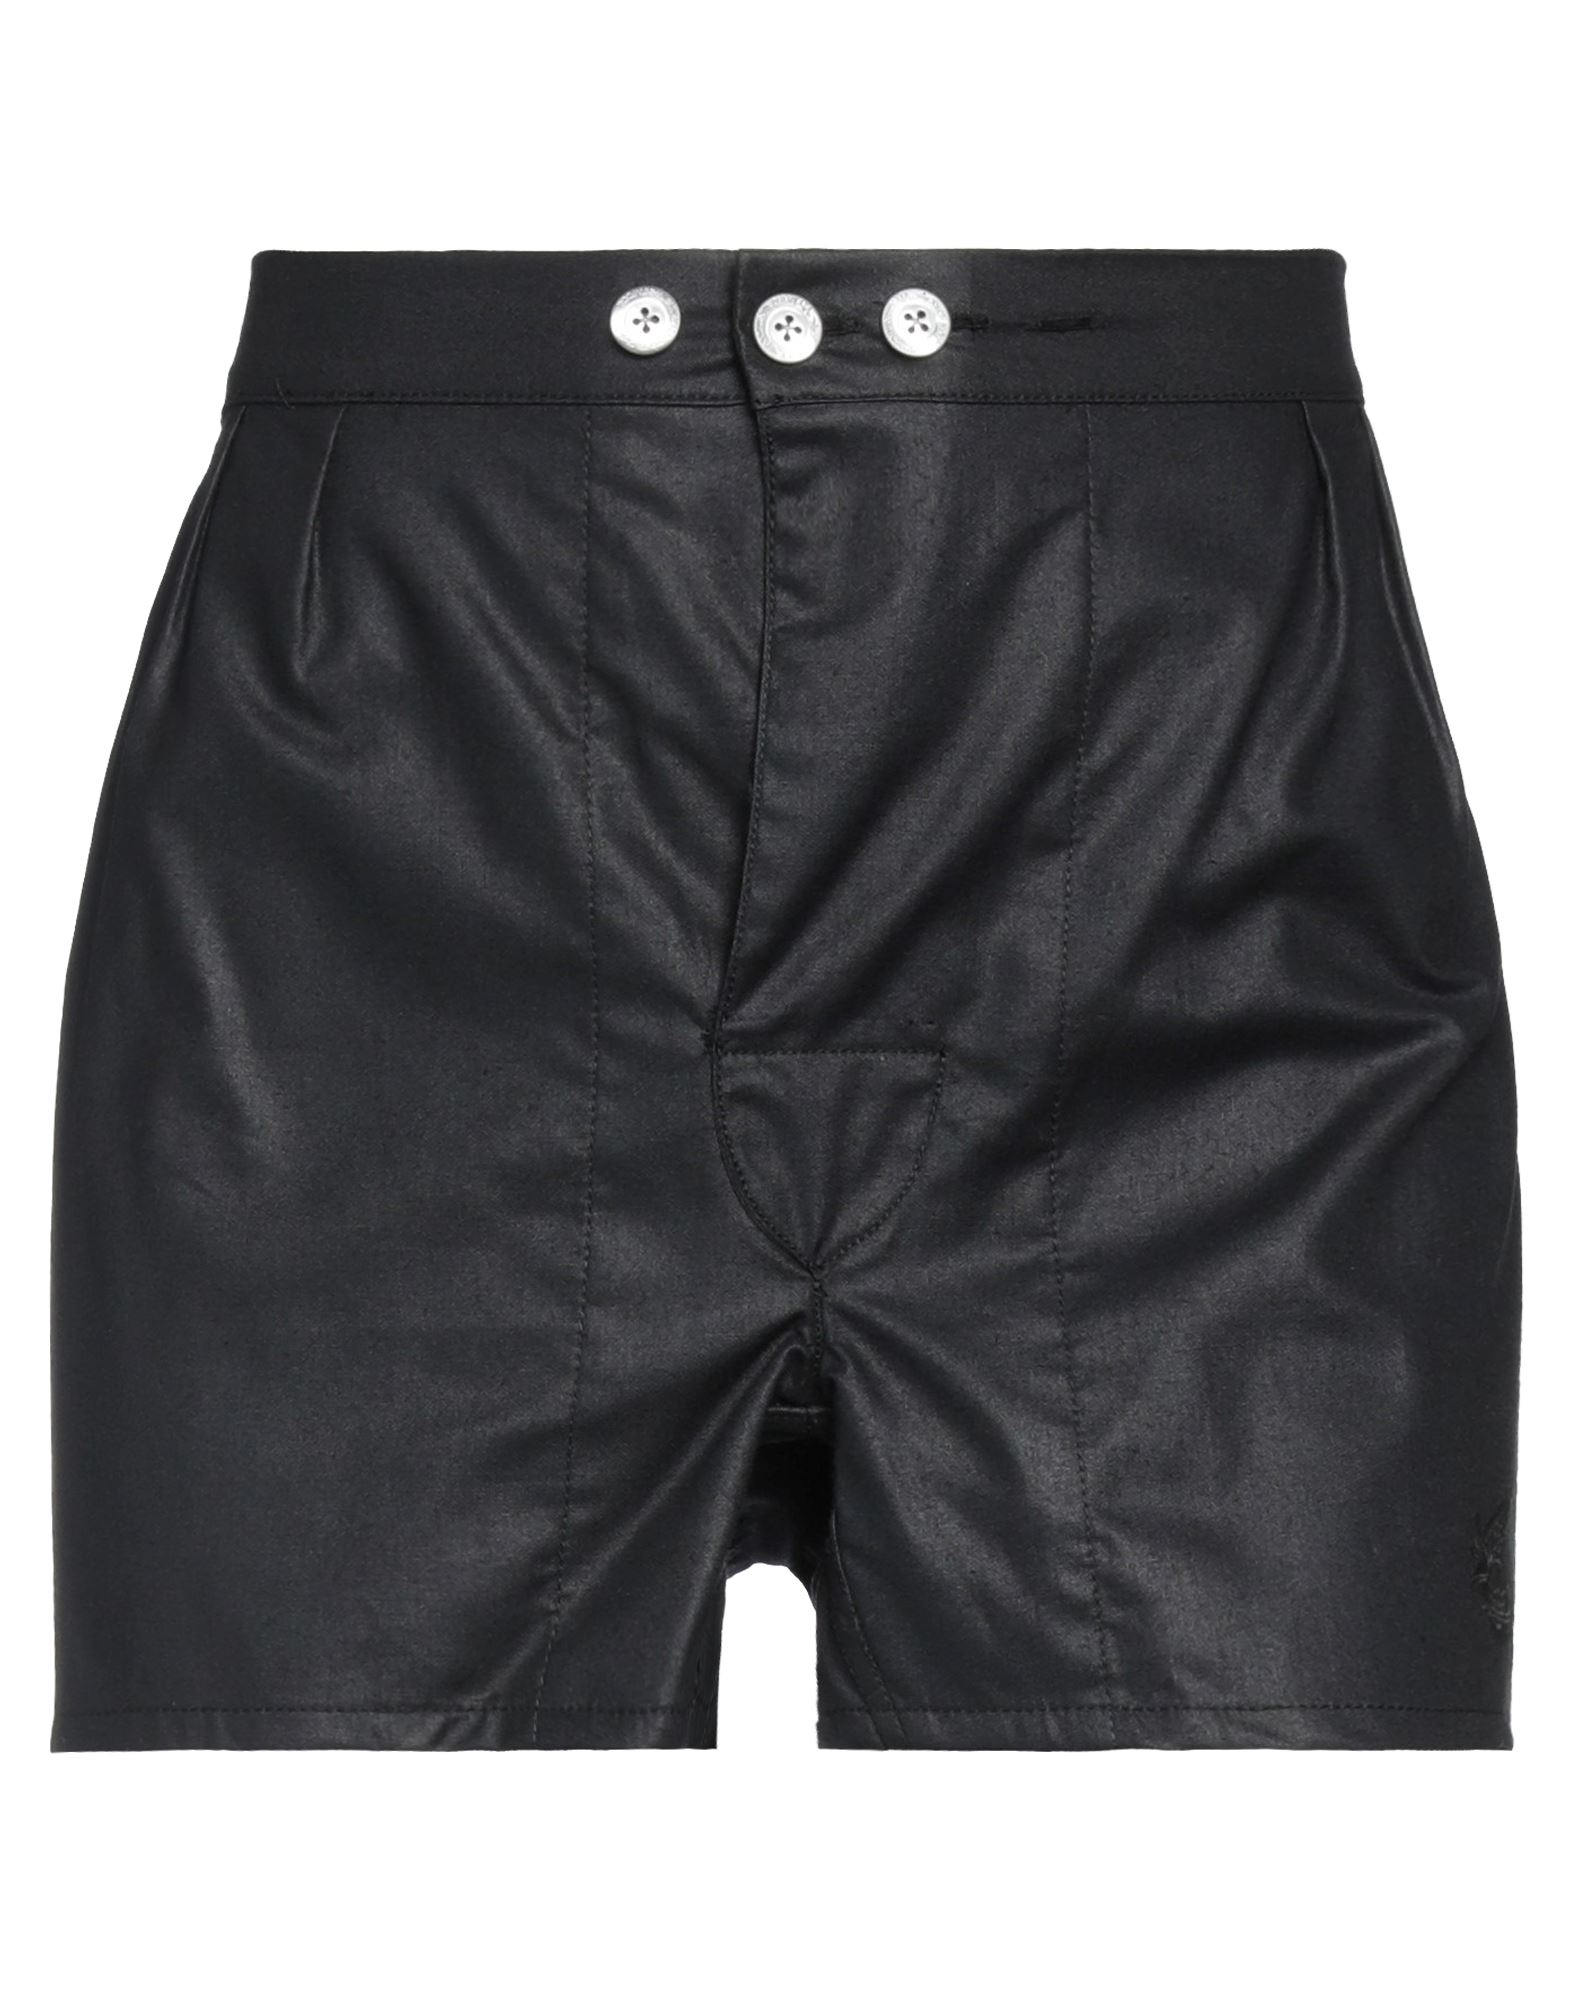 VIVIENNE WESTWOOD ANGLOMANIA Shorts & Bermudashorts Damen Schwarz von VIVIENNE WESTWOOD ANGLOMANIA